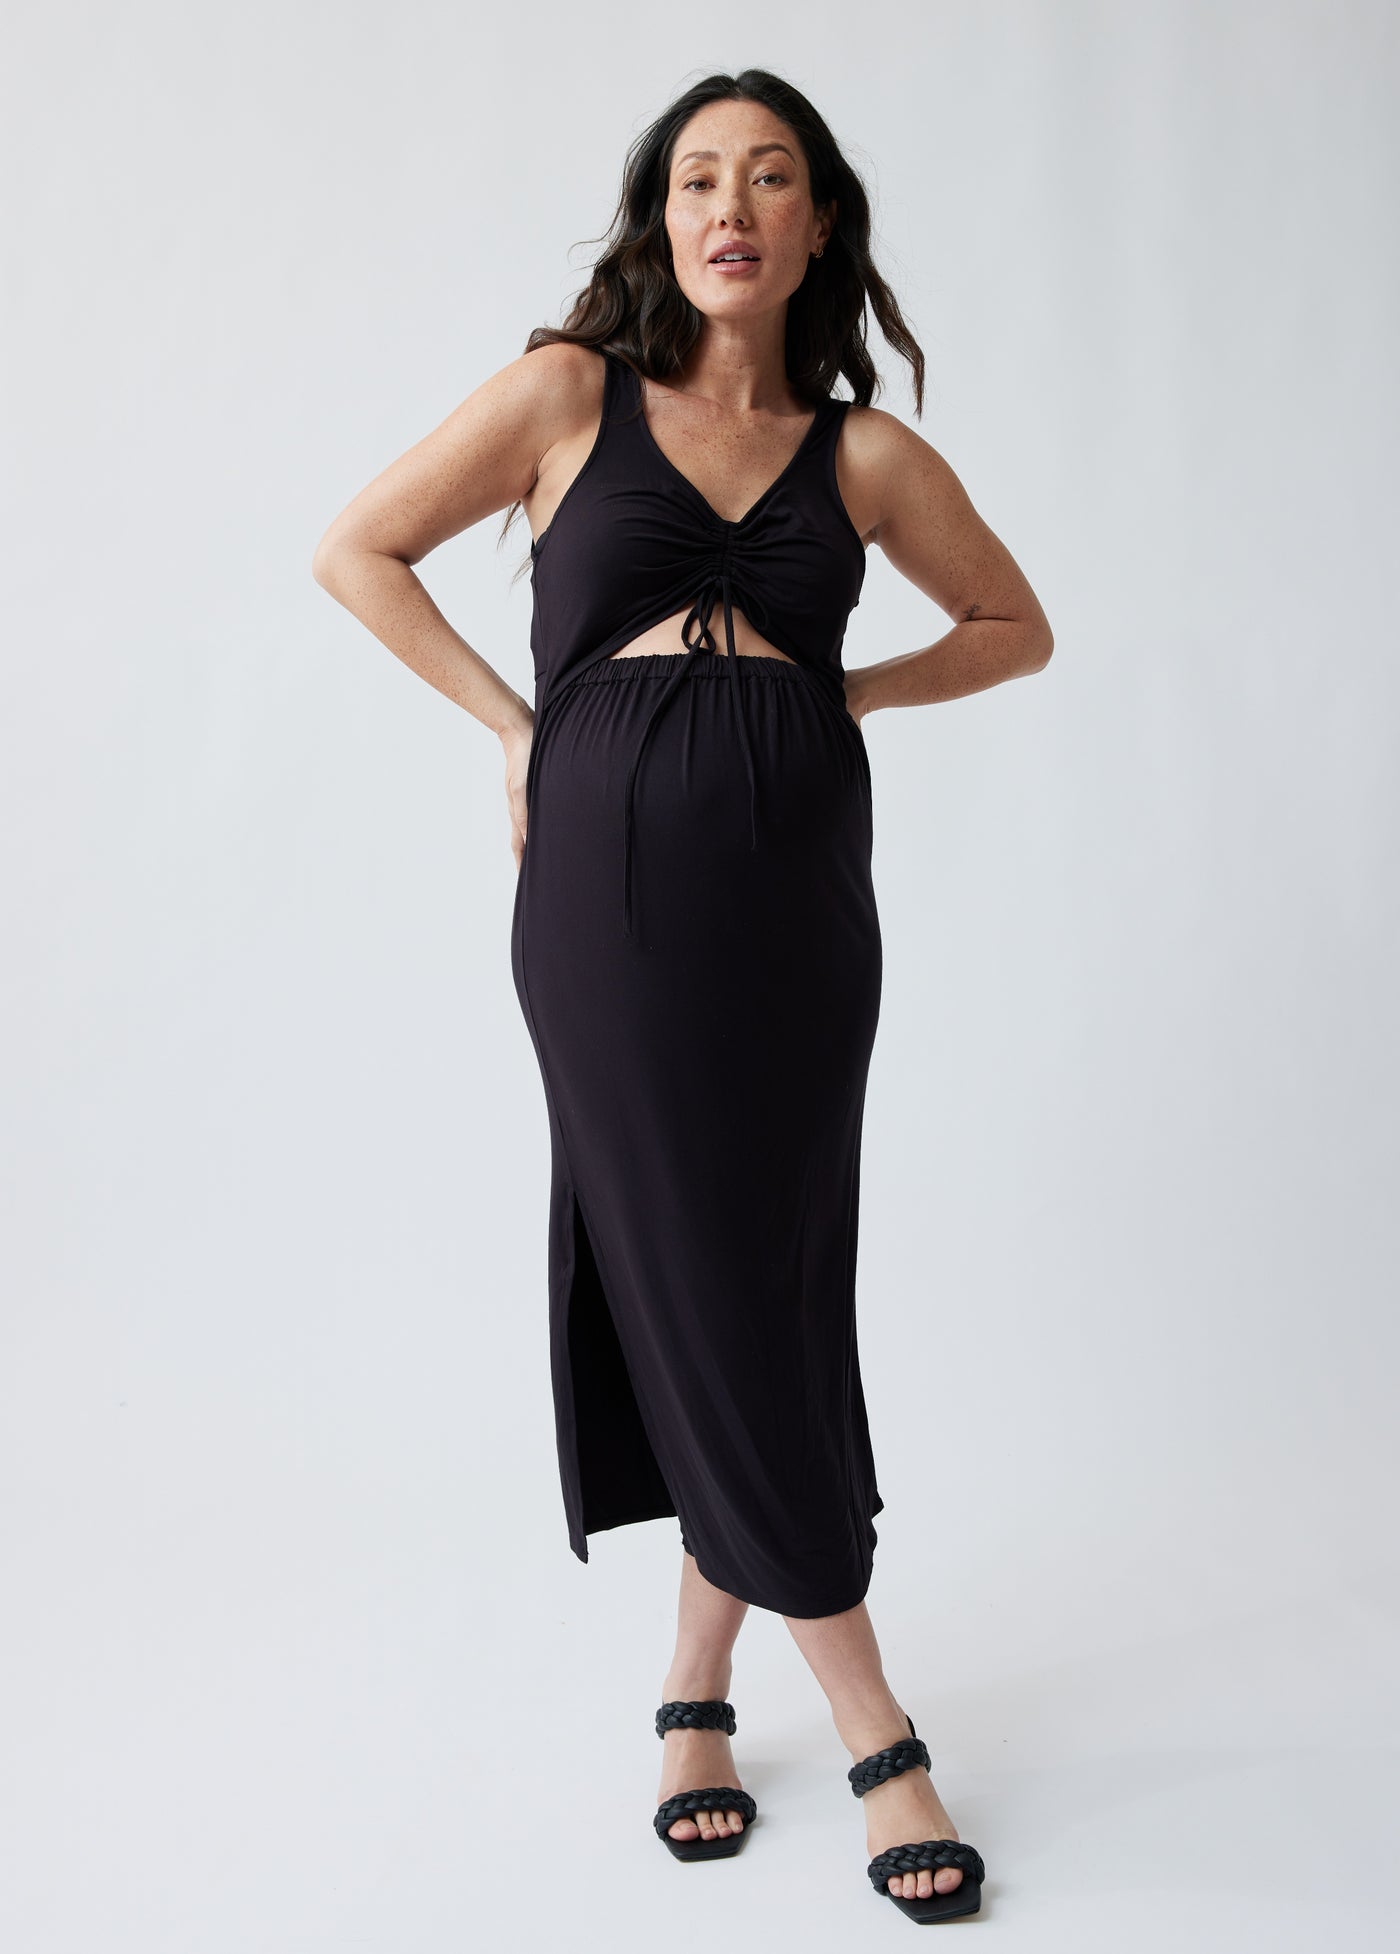 Aylya is 5’6”, 30 weeks pregnant, and wearing size S||Black